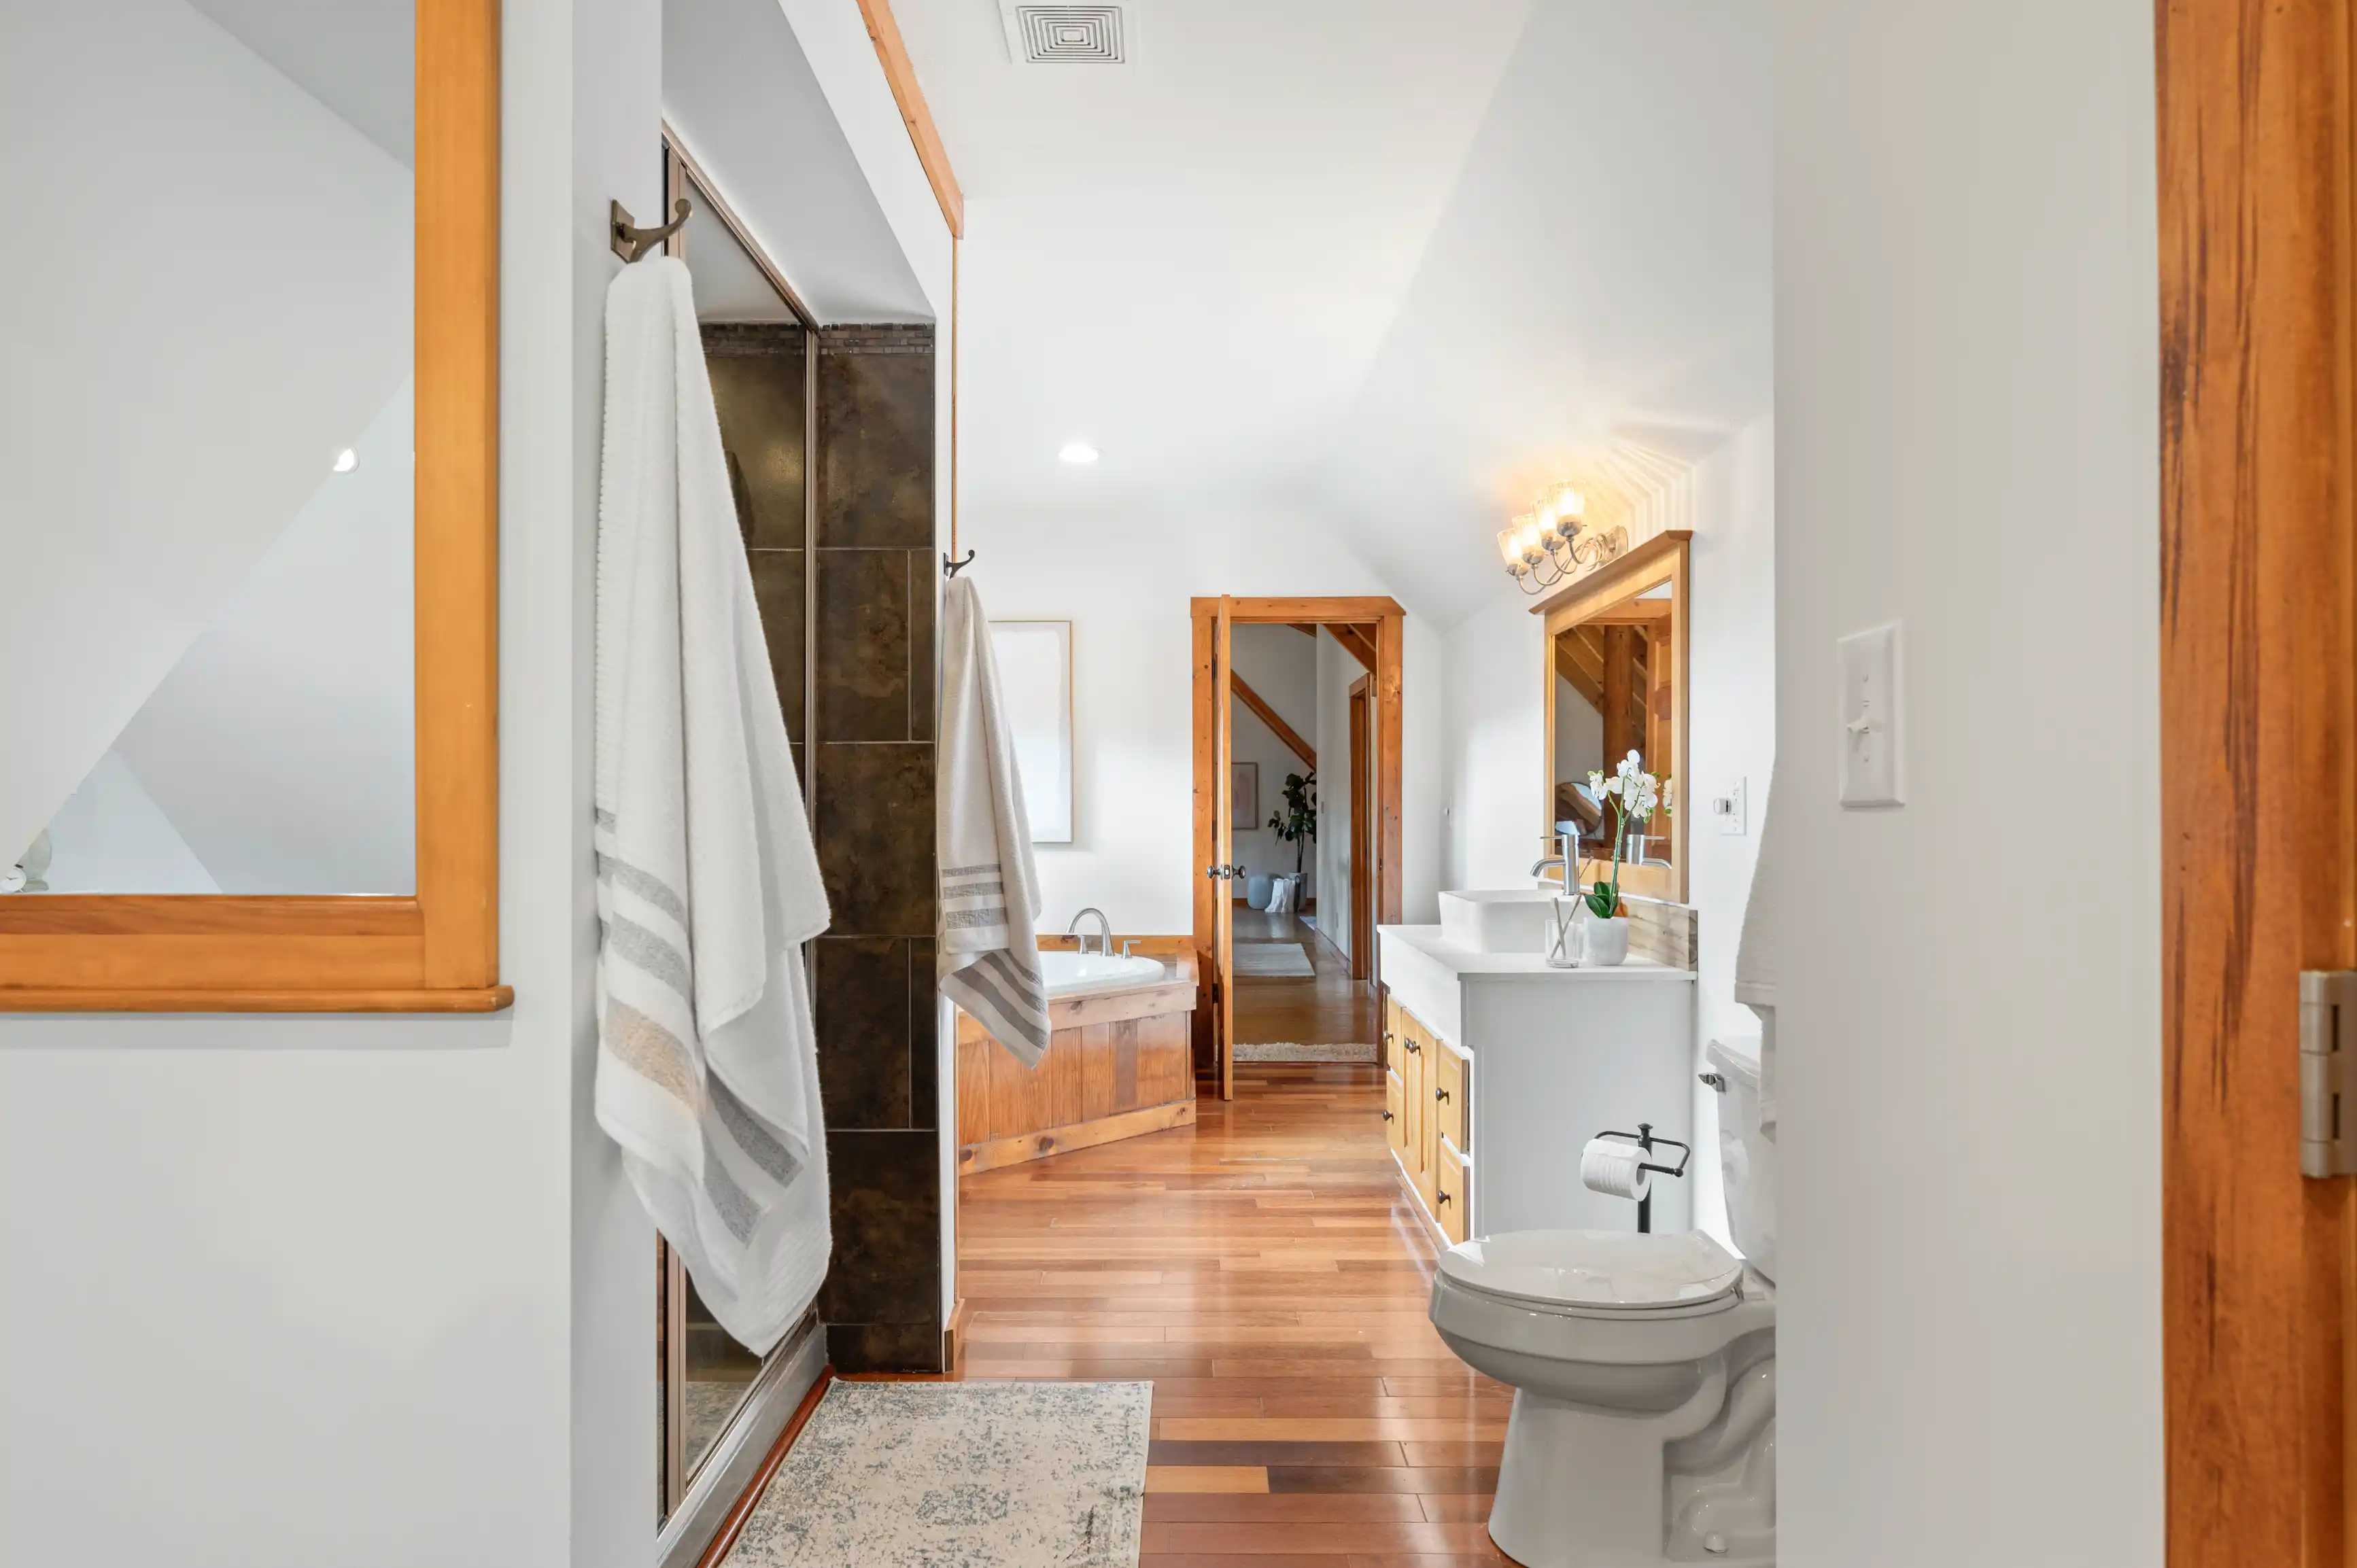 Modern bathroom interior with a glass shower, white vanity with a rectangular basin, wood frames and accents, and towels hanging on a rack by a mirror.